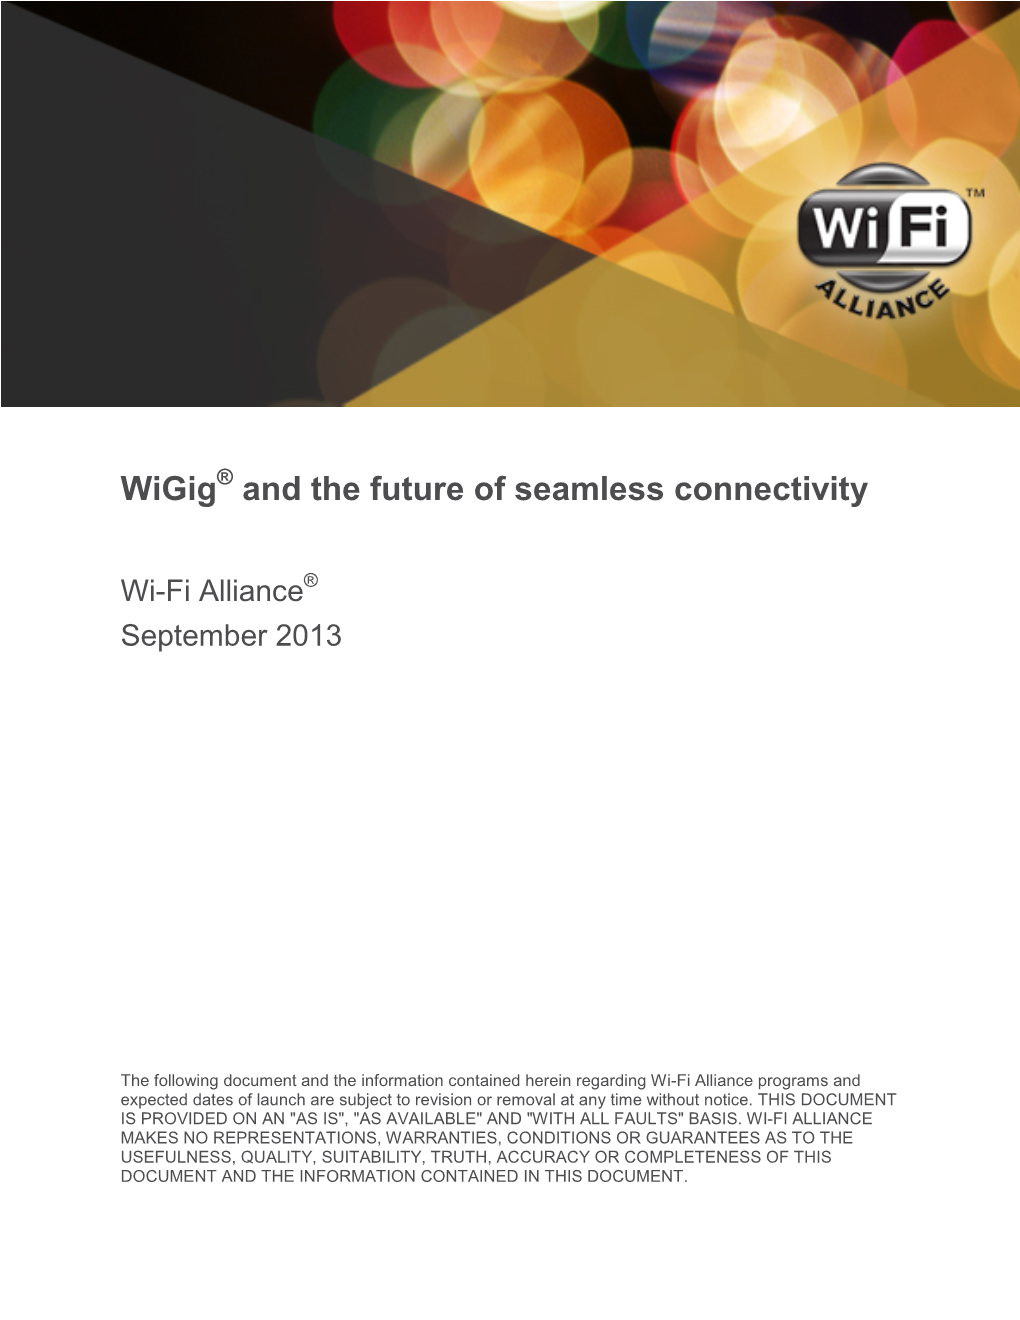 Wigig® and the Future of Seamless Connectivity